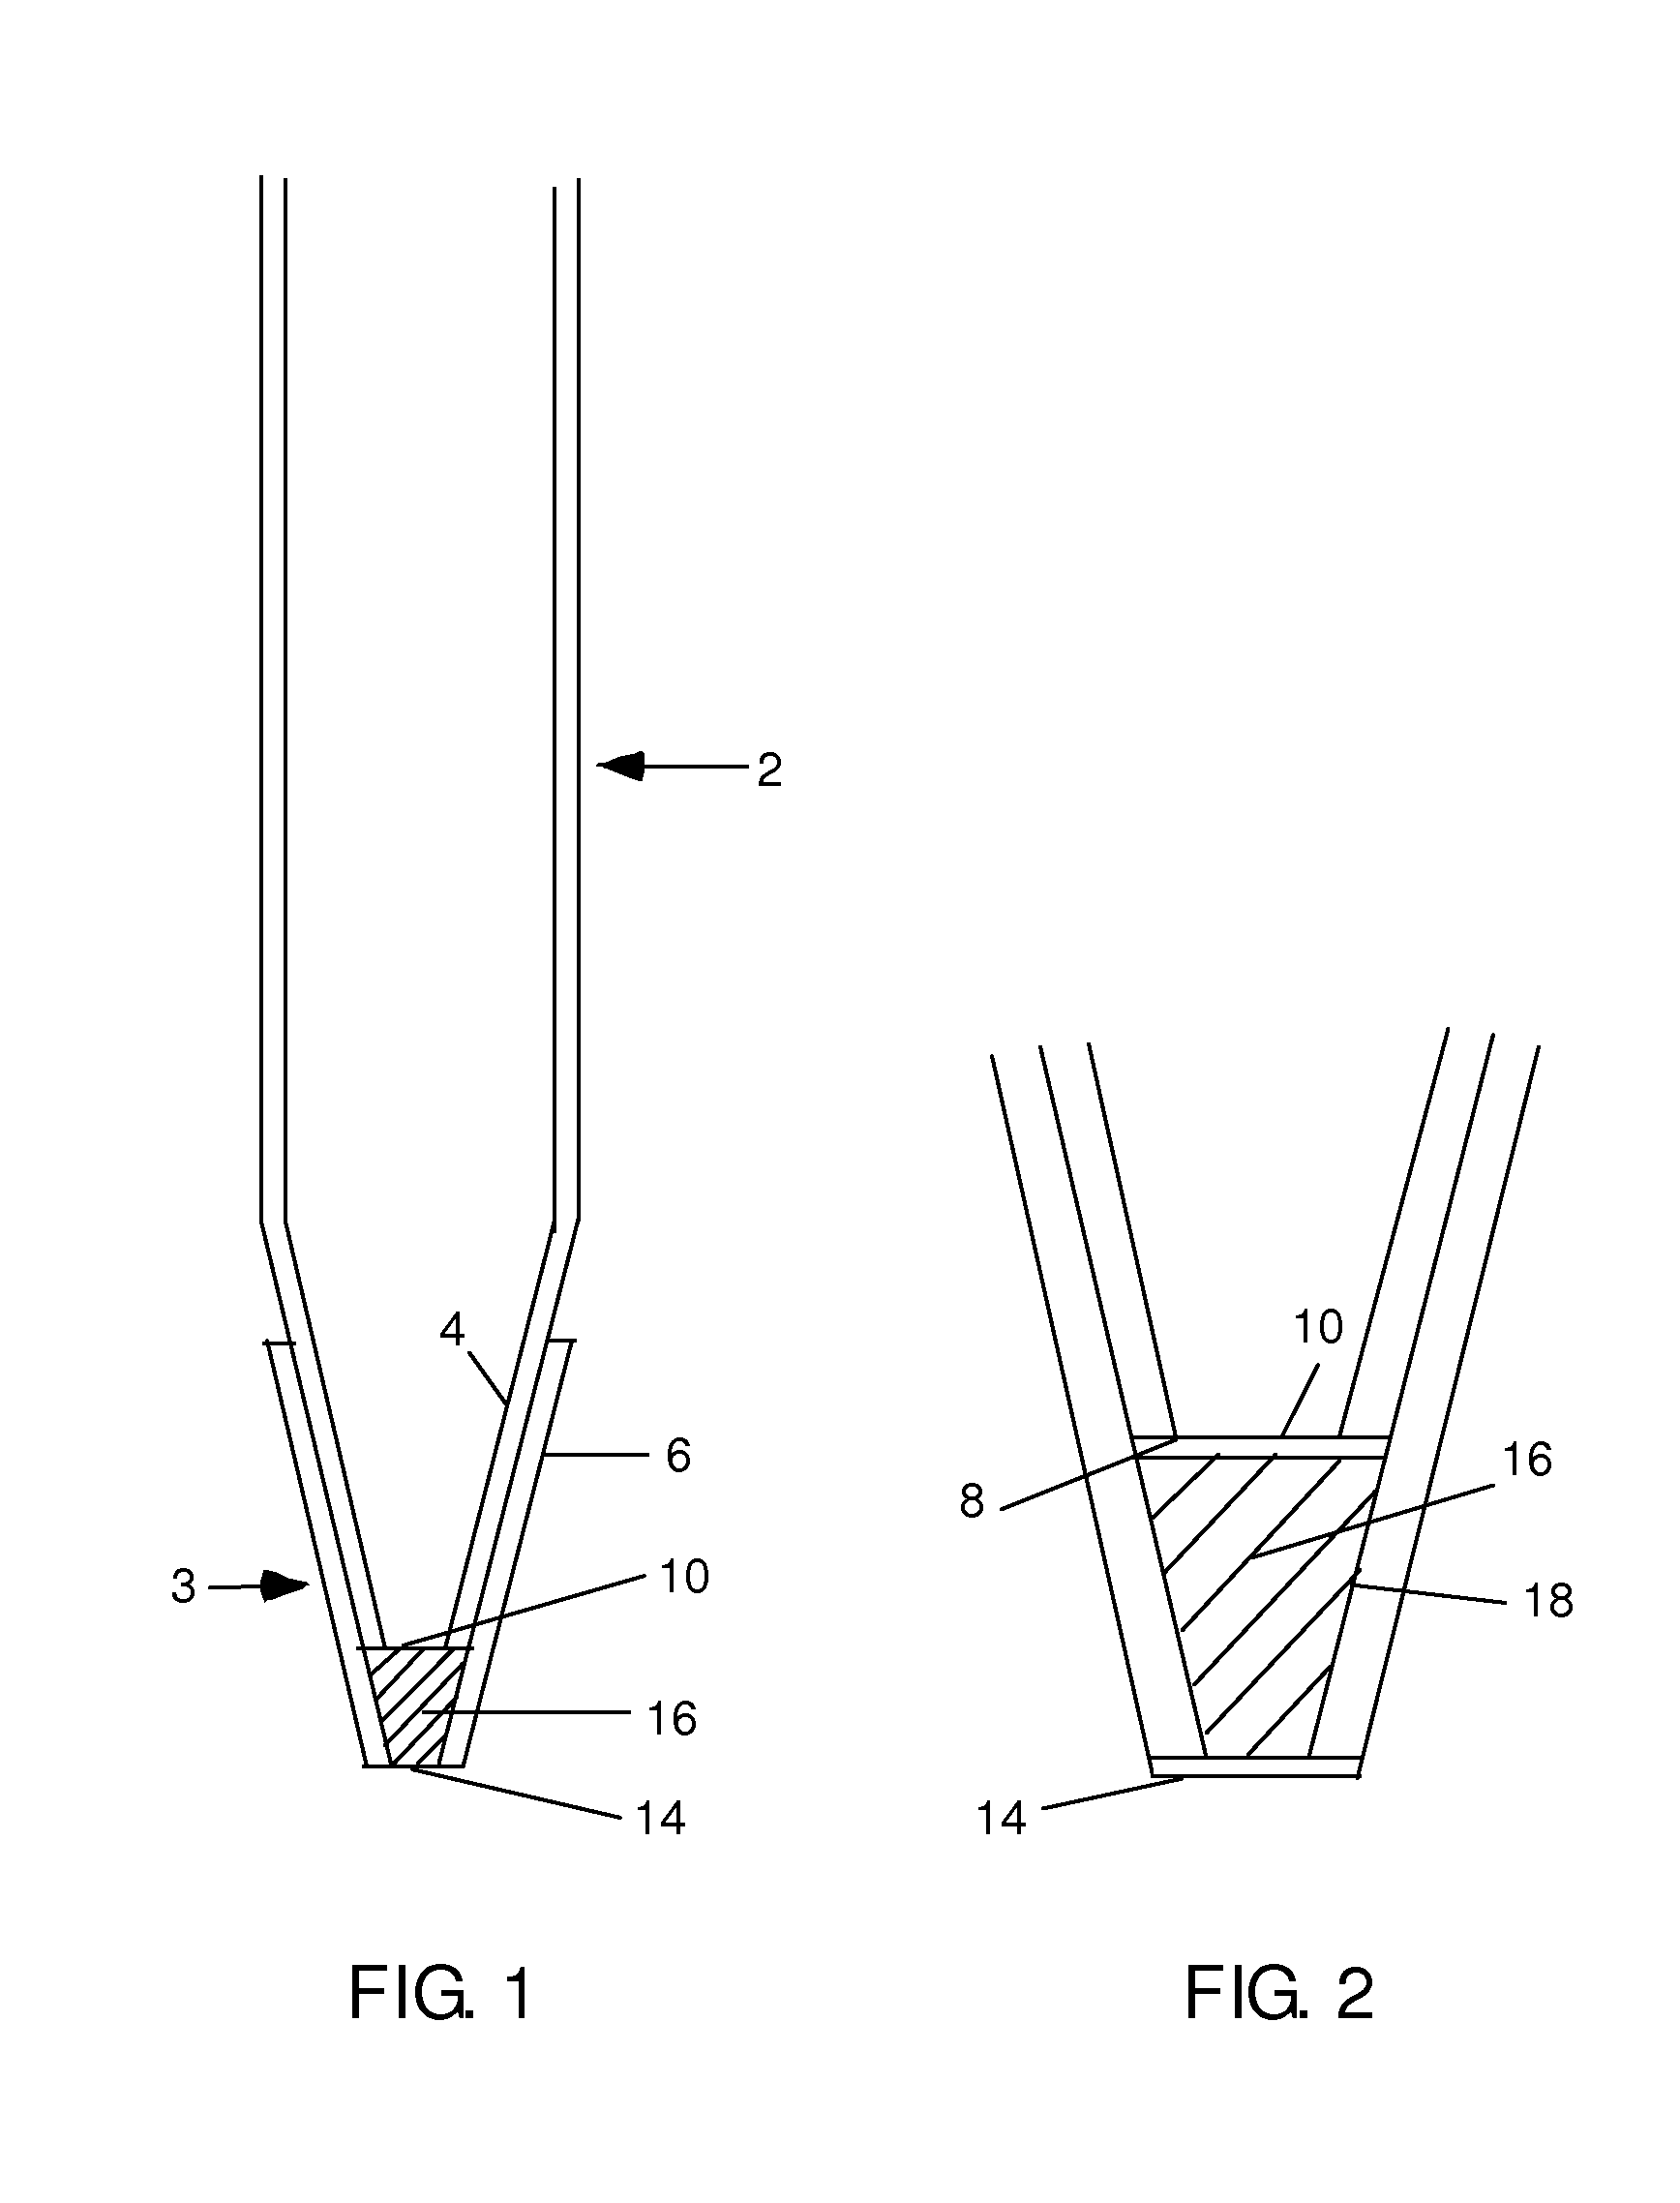 Method and Device for Gravity Flow Chromatography